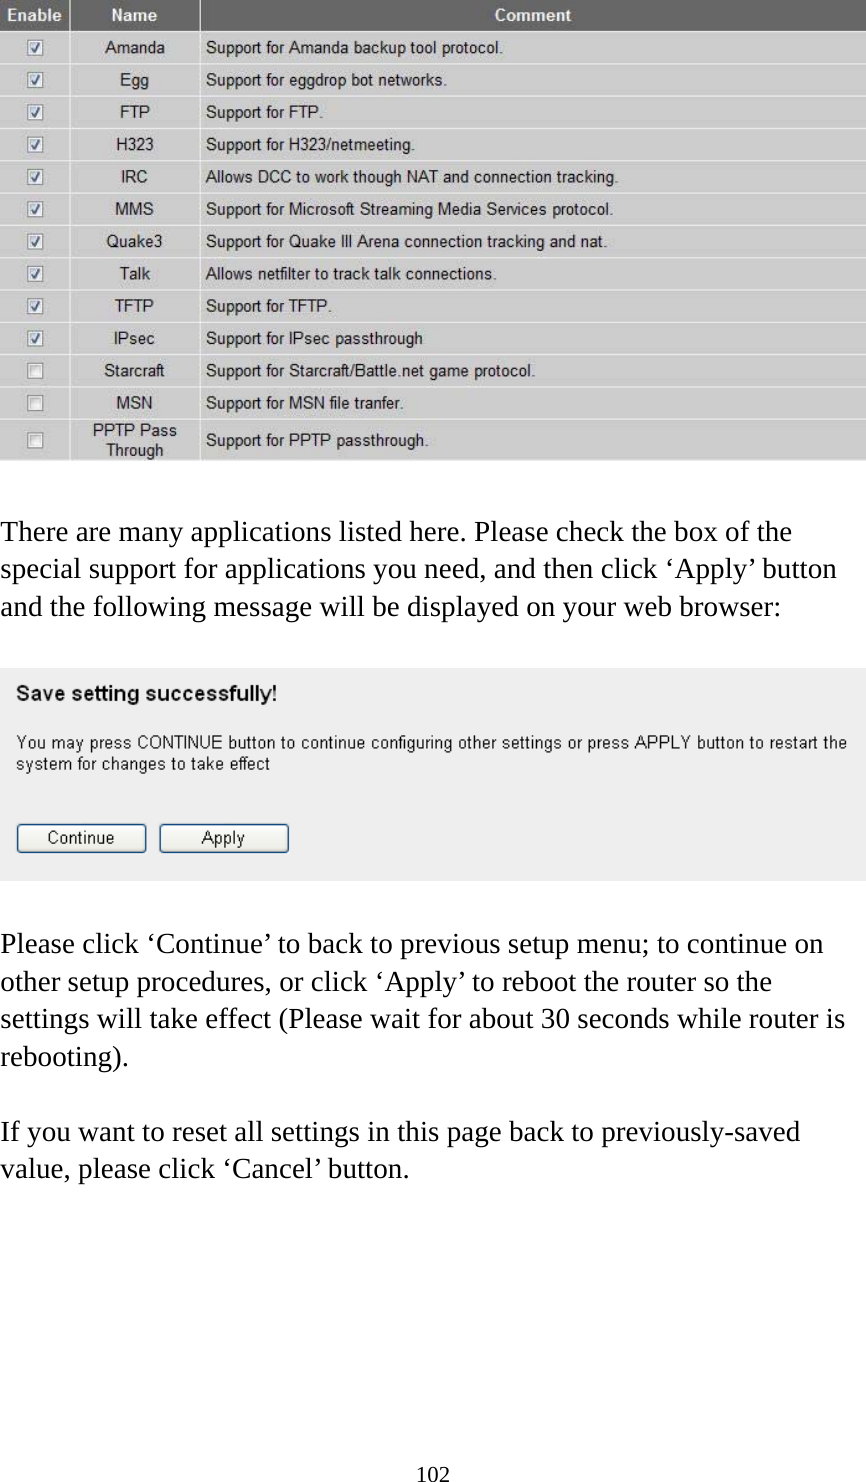 102   There are many applications listed here. Please check the box of the special support for applications you need, and then click ‘Apply’ button and the following message will be displayed on your web browser:    Please click ‘Continue’ to back to previous setup menu; to continue on other setup procedures, or click ‘Apply’ to reboot the router so the settings will take effect (Please wait for about 30 seconds while router is rebooting).  If you want to reset all settings in this page back to previously-saved value, please click ‘Cancel’ button.   